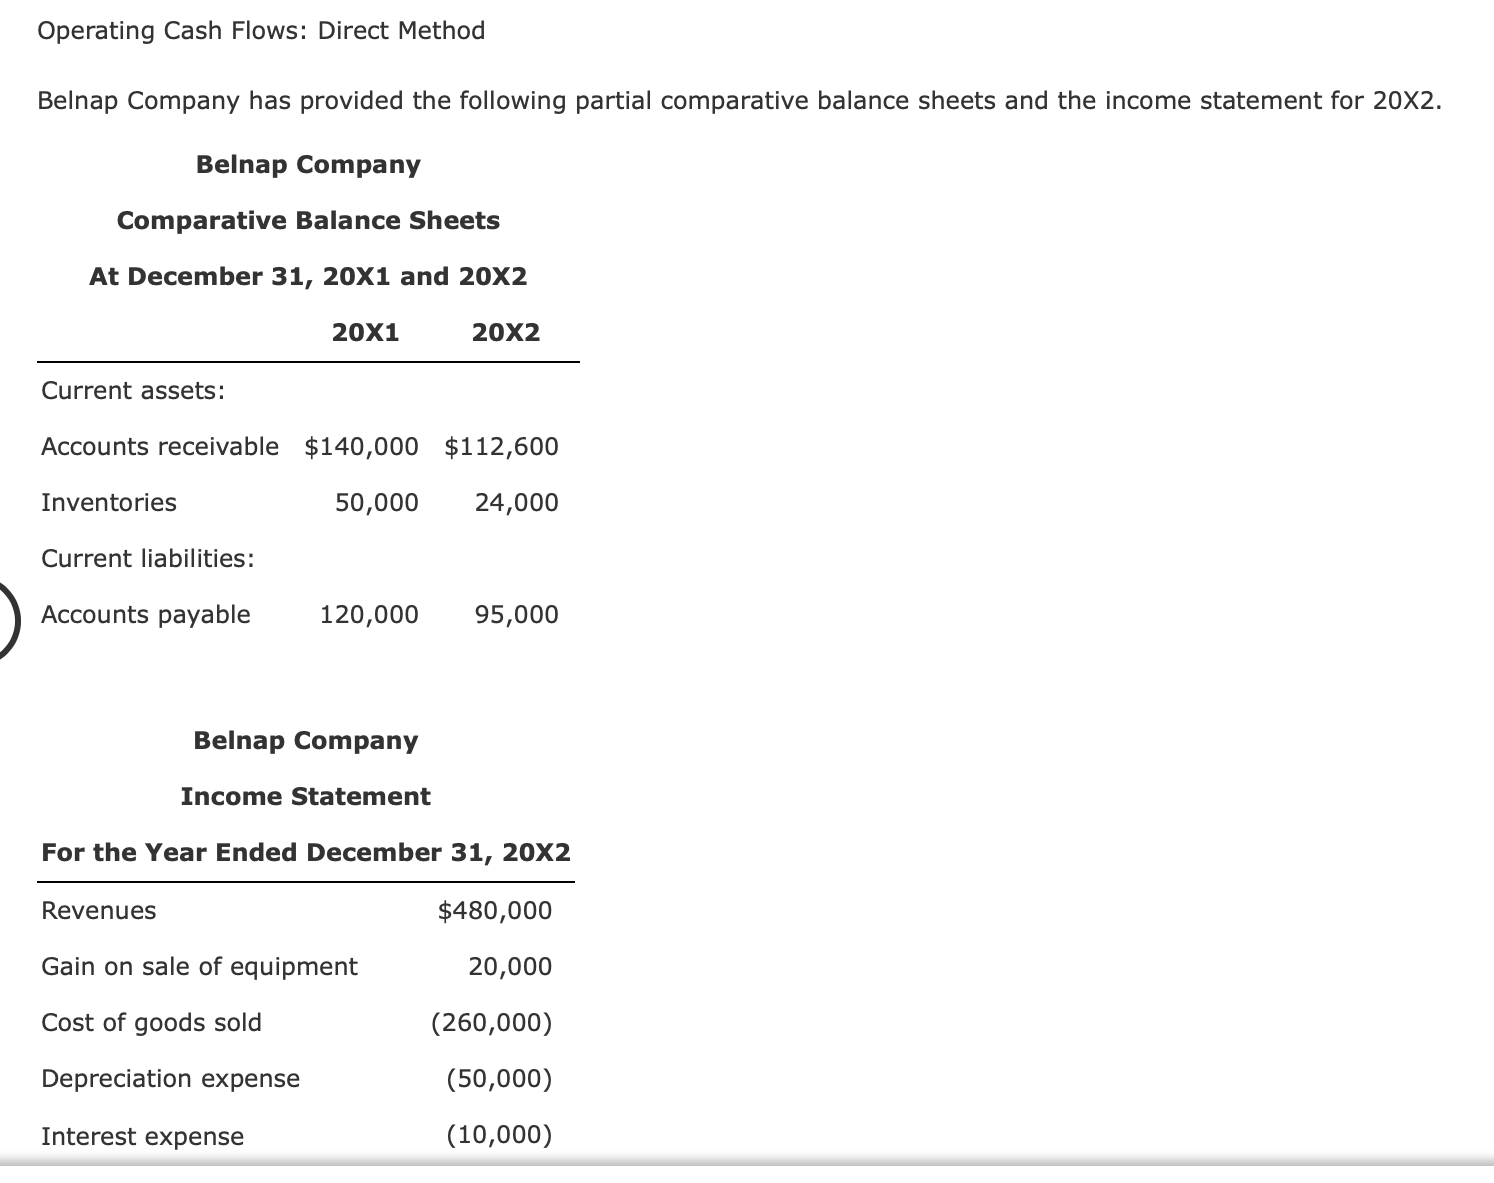 Belnap Company has provided the following partial comparative balance sheets and the income statement for 20X2.
Belnap Company
Comparative Balance Sheets
At December 31, 20X1 and 20X2
20X1
20X2
Current assets:
Accounts receivable $140,000 $112,600
Inventories
50,000
24,000
Current liabilities:
Accounts payable
120,000
95,000
Belnap Company
Income Statement
For the Year Ended December 31, 20X2
Revenues
$480,000
Gain on sale of equipment
20,000
Cost of goods sold
(260,000)
Depreciation expense
(50,000)
Interest expense
(10,000)
